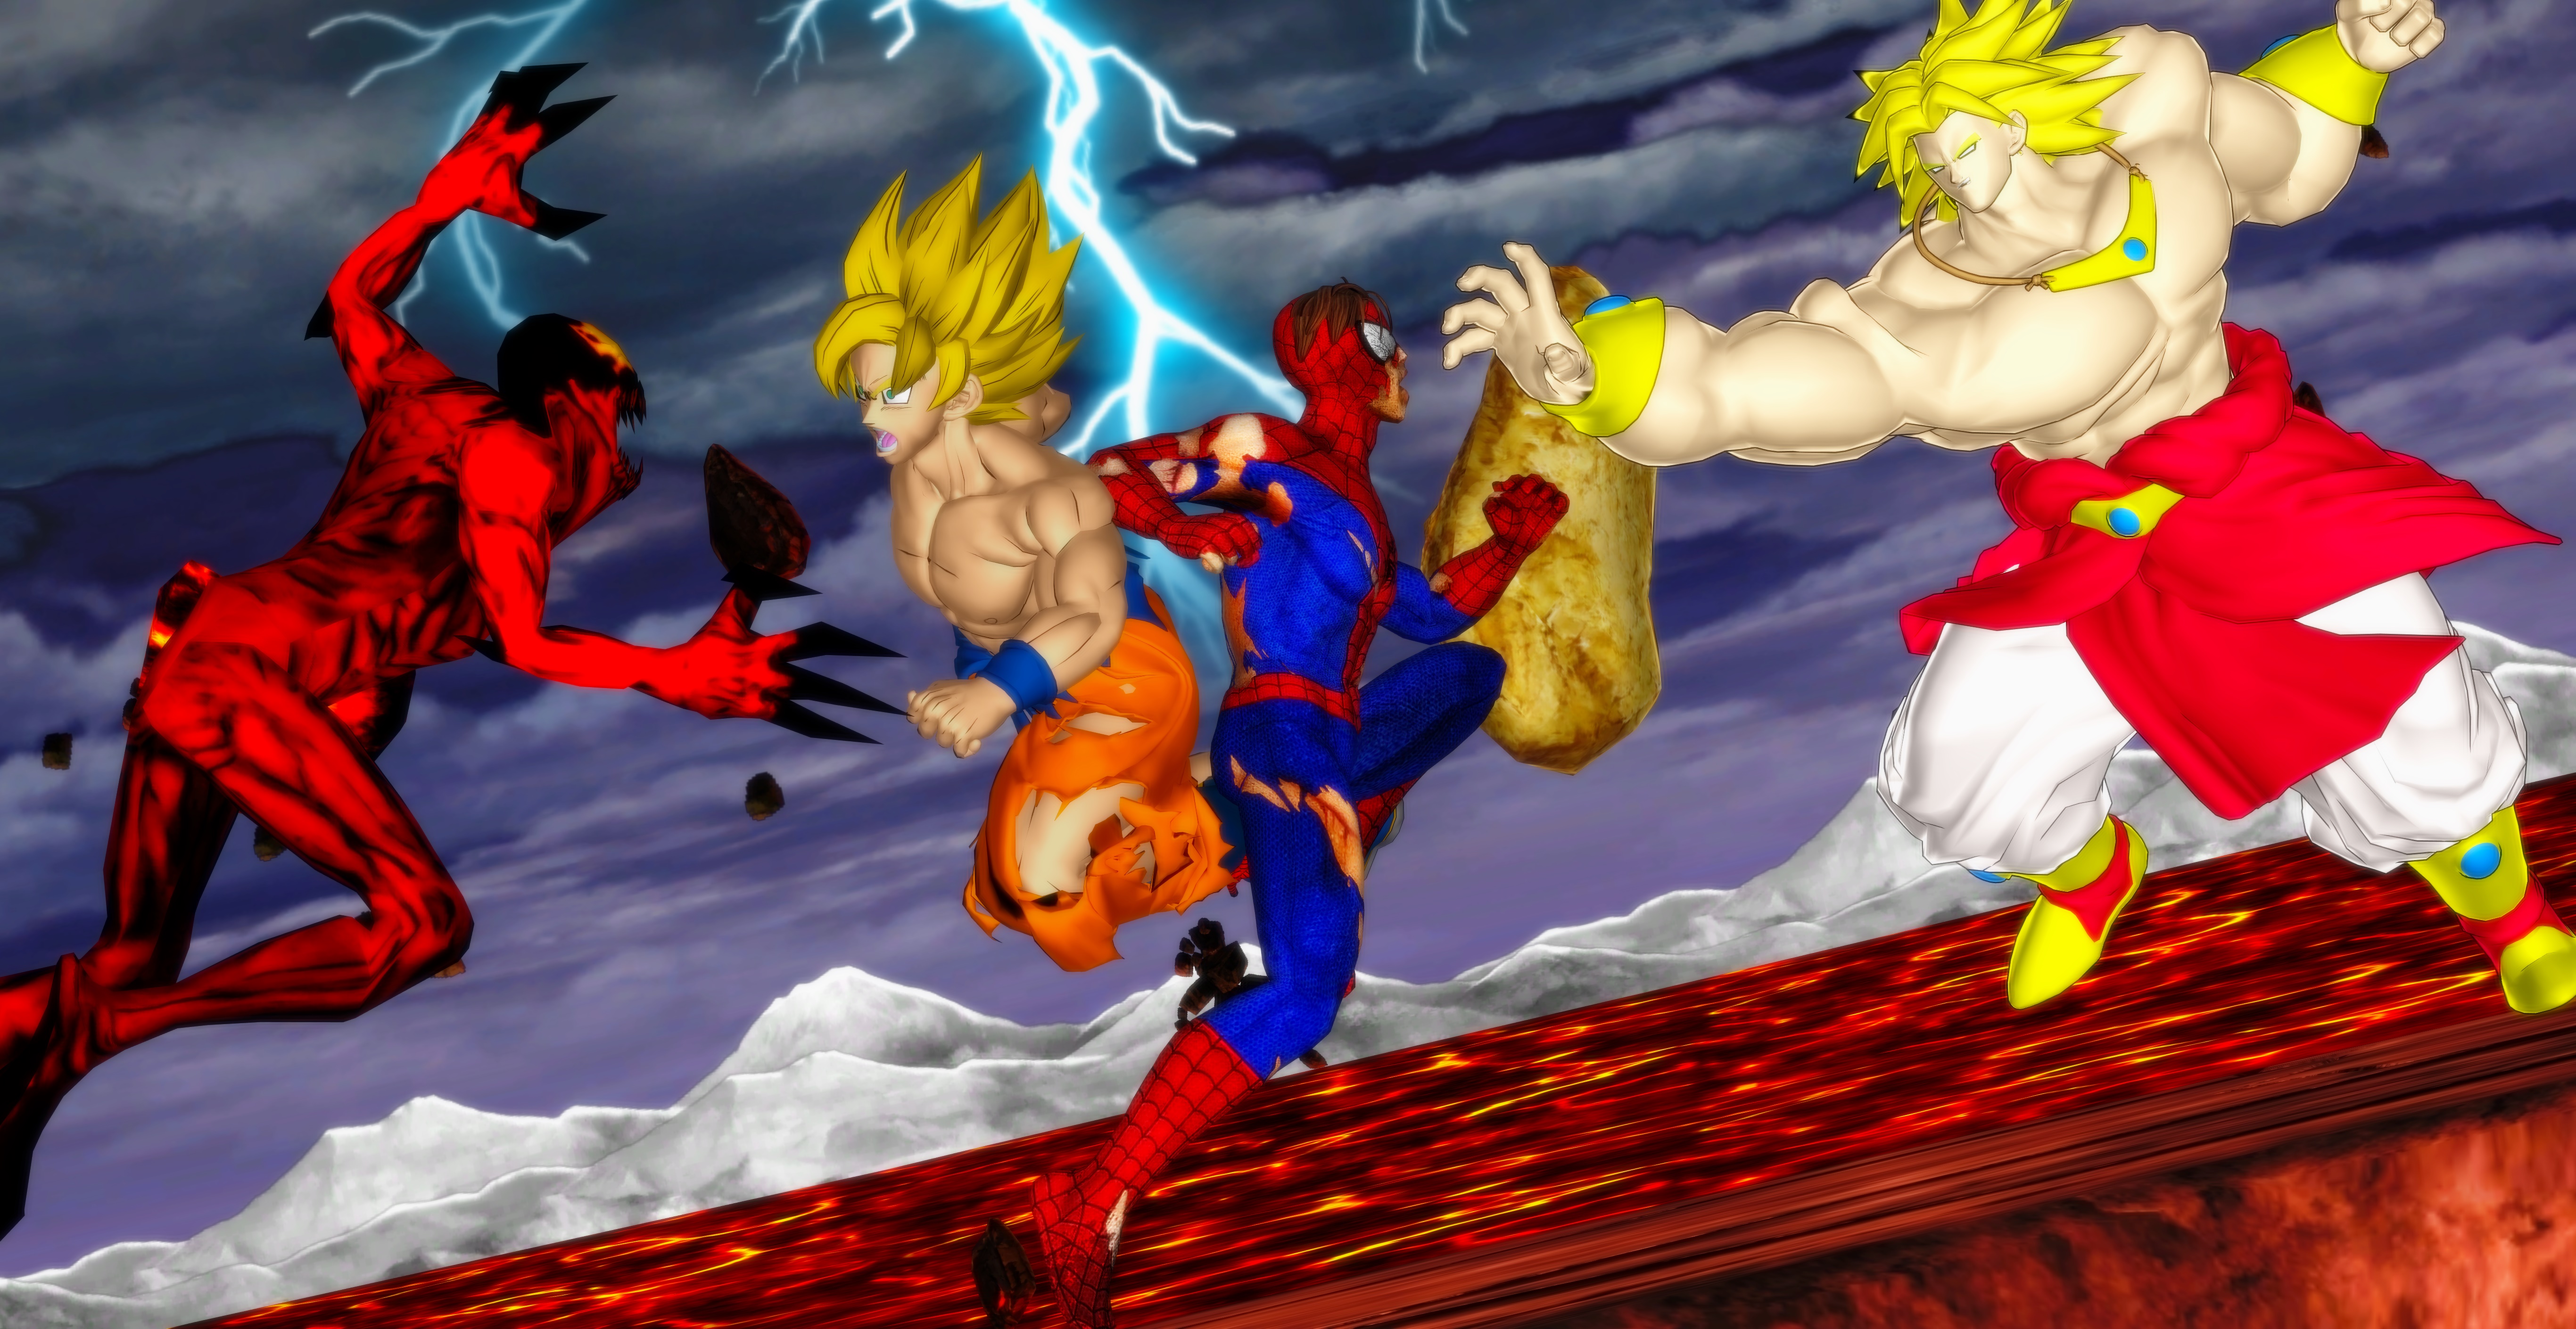 Goku And Spiderman Vs Broly And Carnage by heavengamer on DeviantArt